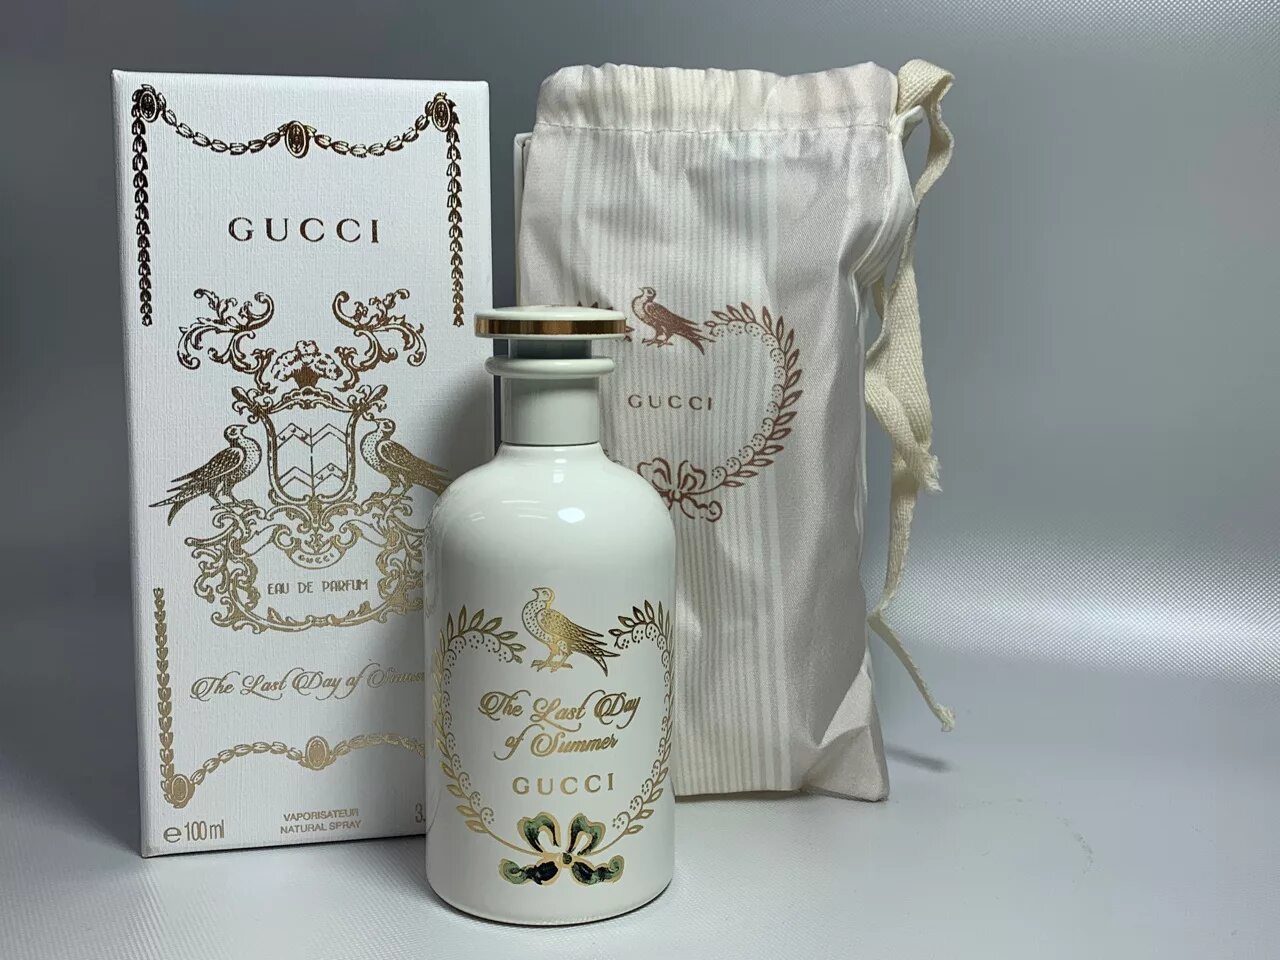 The last Day of Summer Eau de Parfum. Gucci the Alchemist's Garden the last Day of Summer Eau de Parfum. Gucci the last Day of Summer Eau de Parfum. Парфюмерная вода Gucci the last Day of Summer, 100 мл.